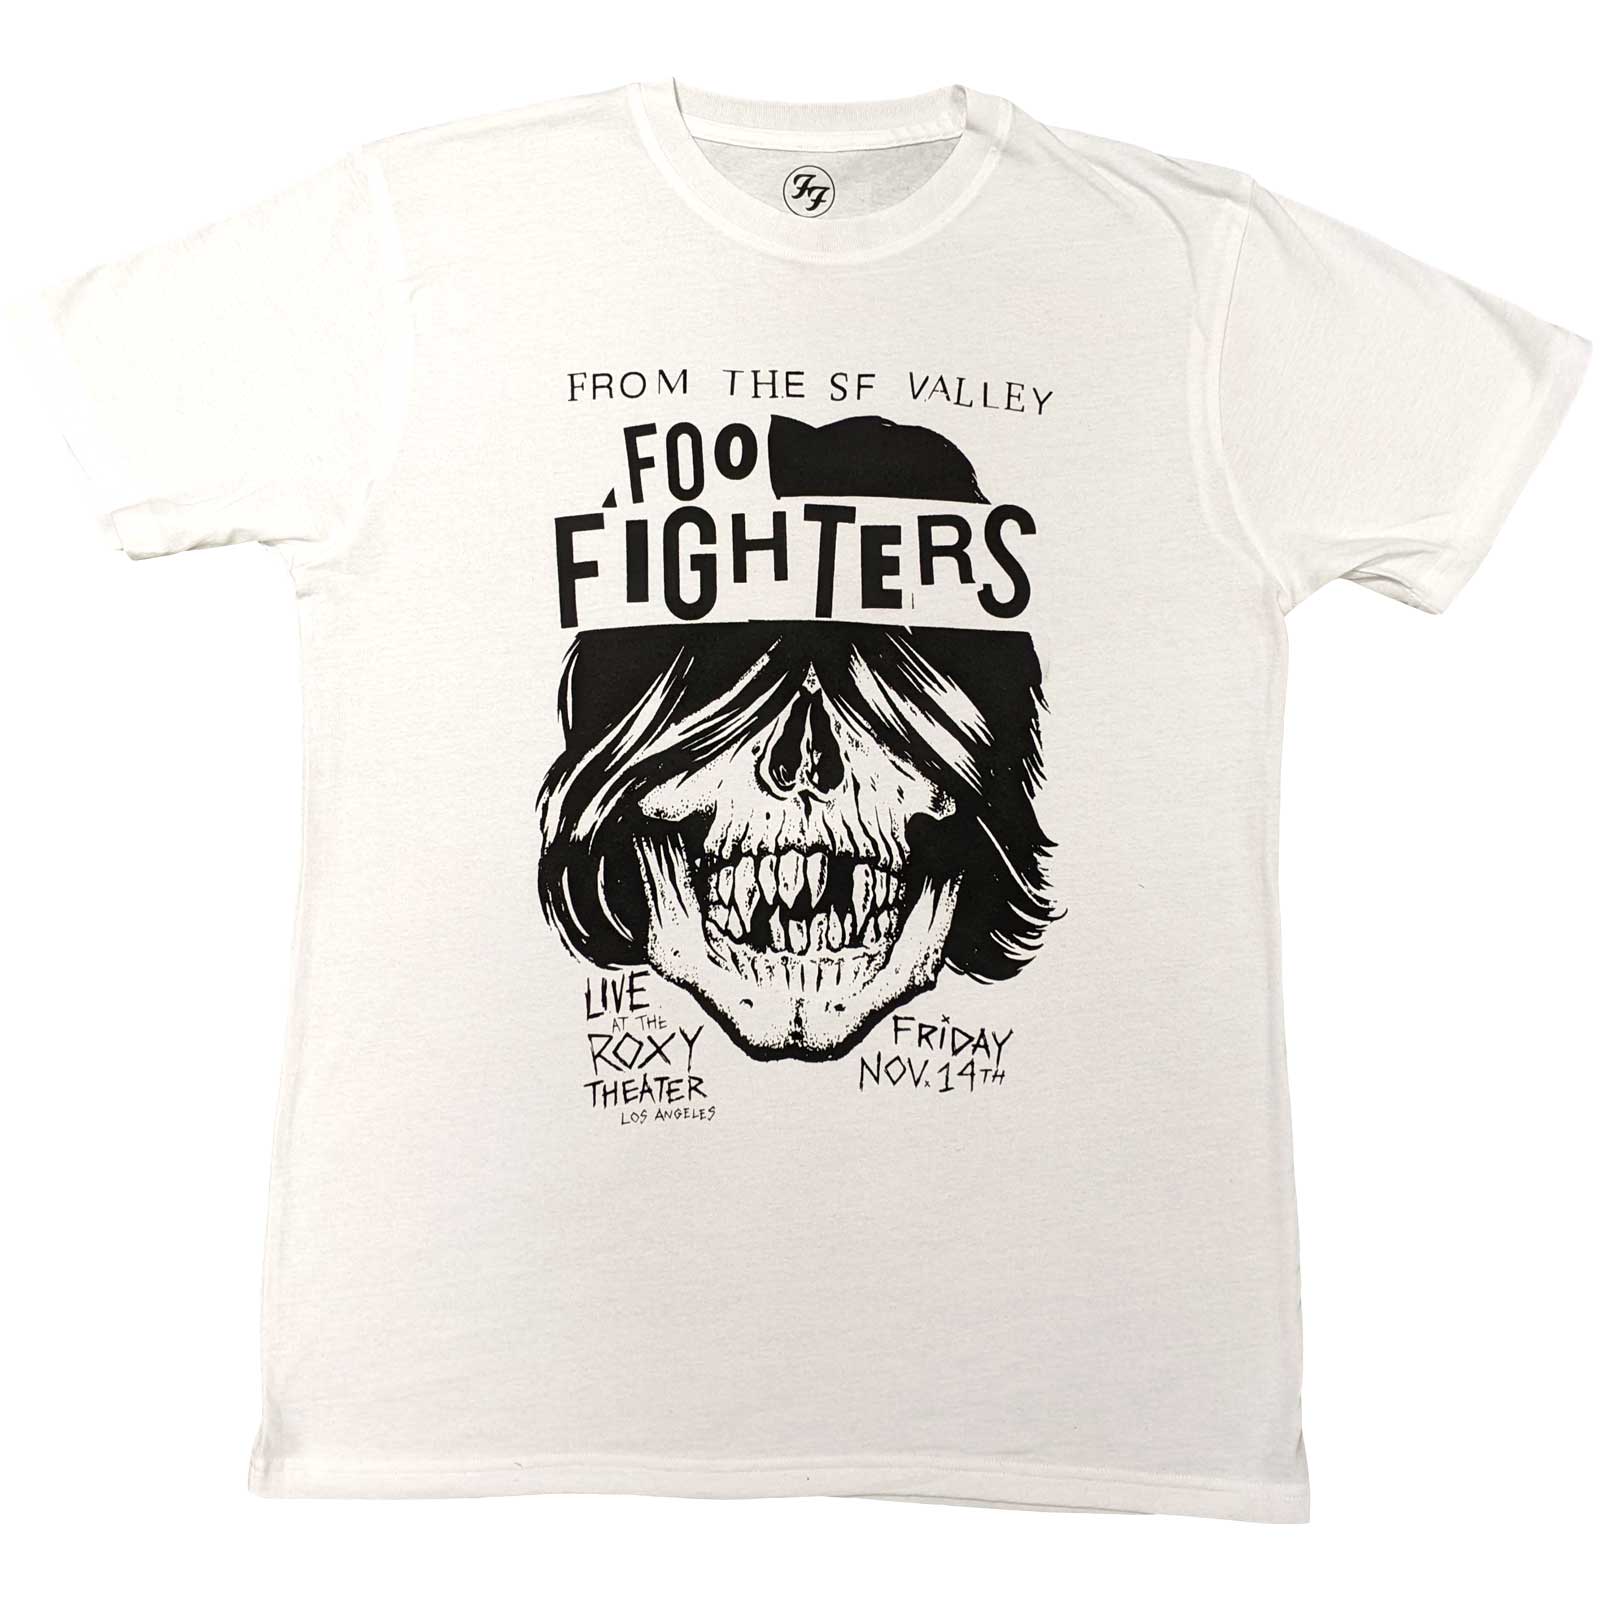 Foo Fighters T-Shirt - Roxy Flyer - White Unisex Official Licensed Design - Jelly Frog